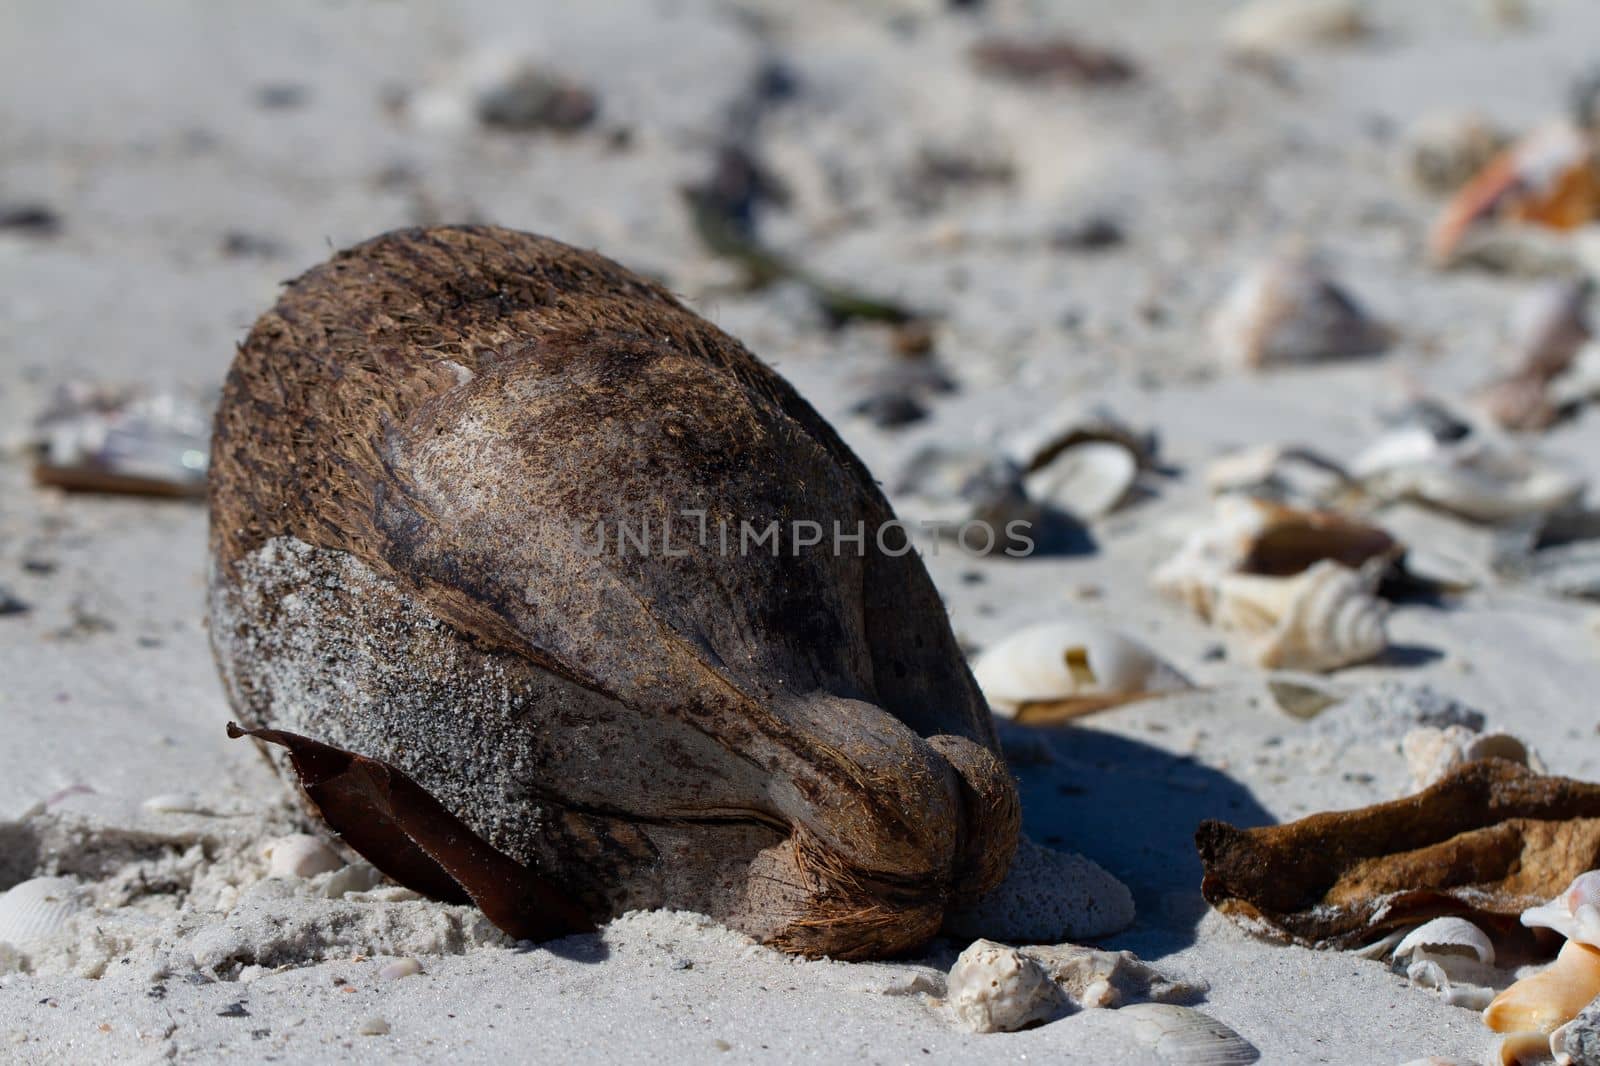 Old coconut shell found on the beach, near Naples Florida by Granchinho